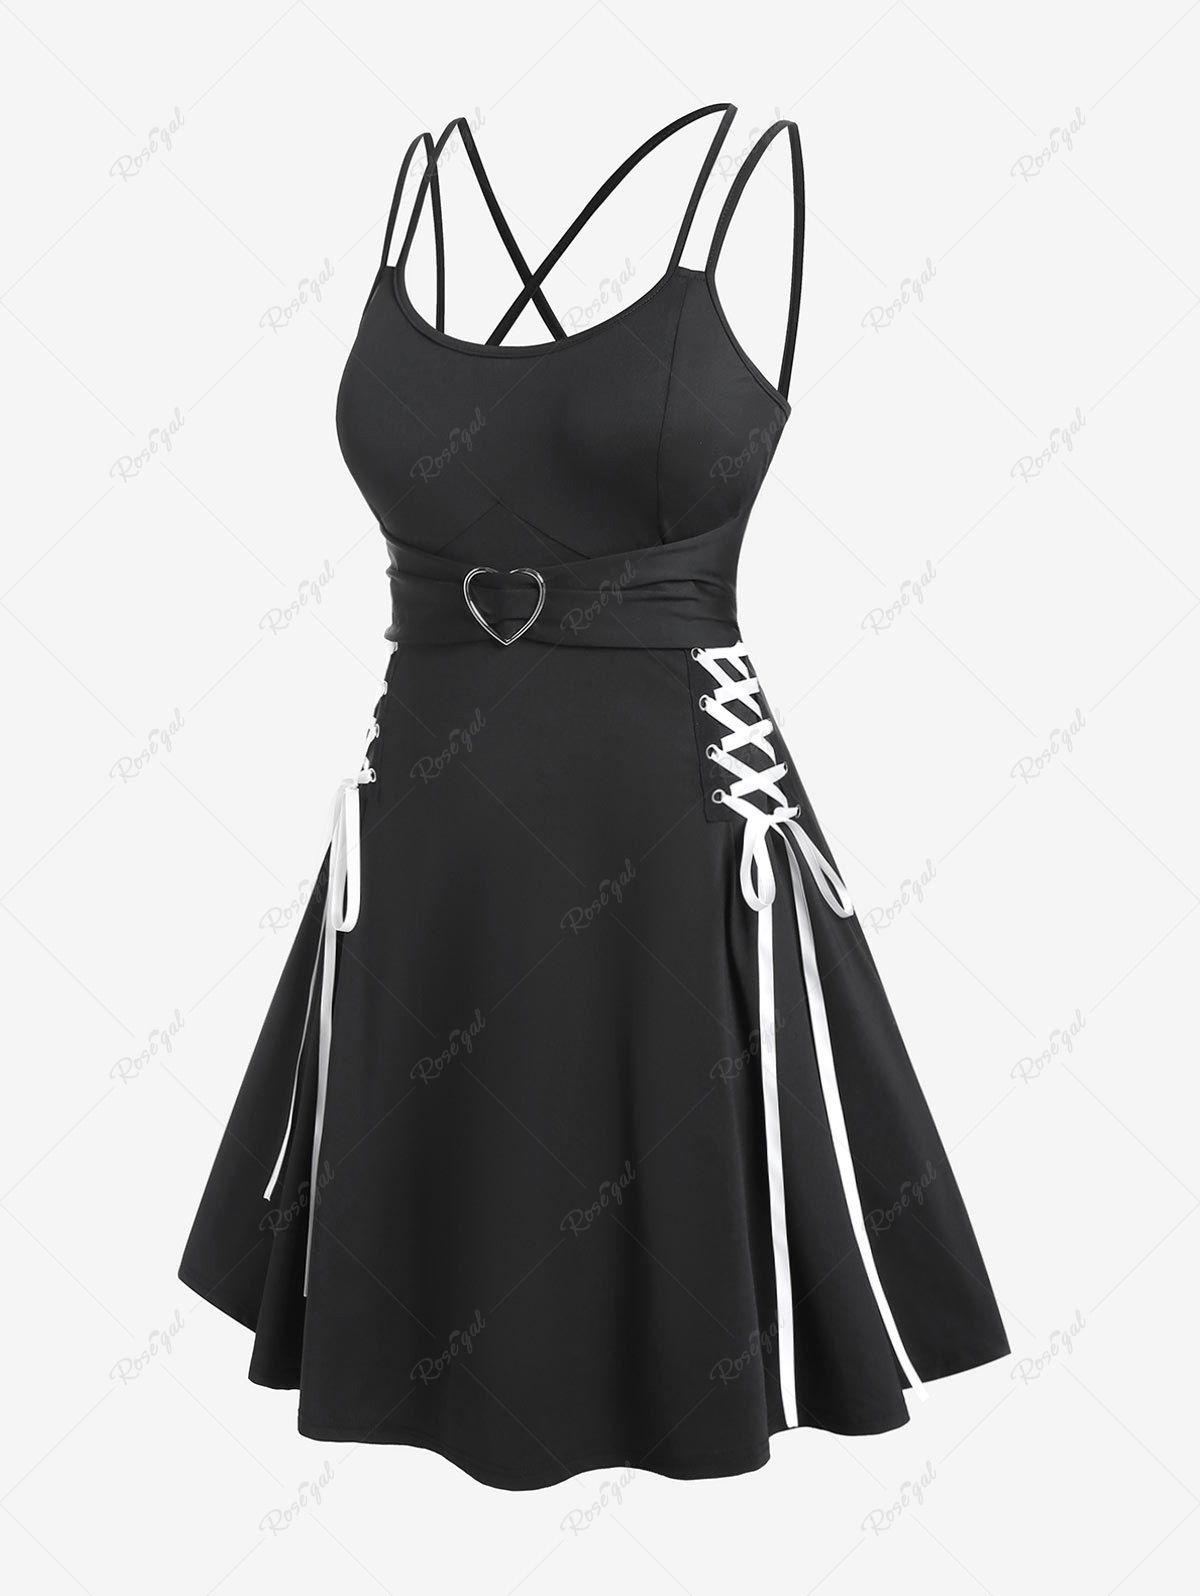 New Plus Size Lace Up Backless High Waisted A Line Gothic Dress  